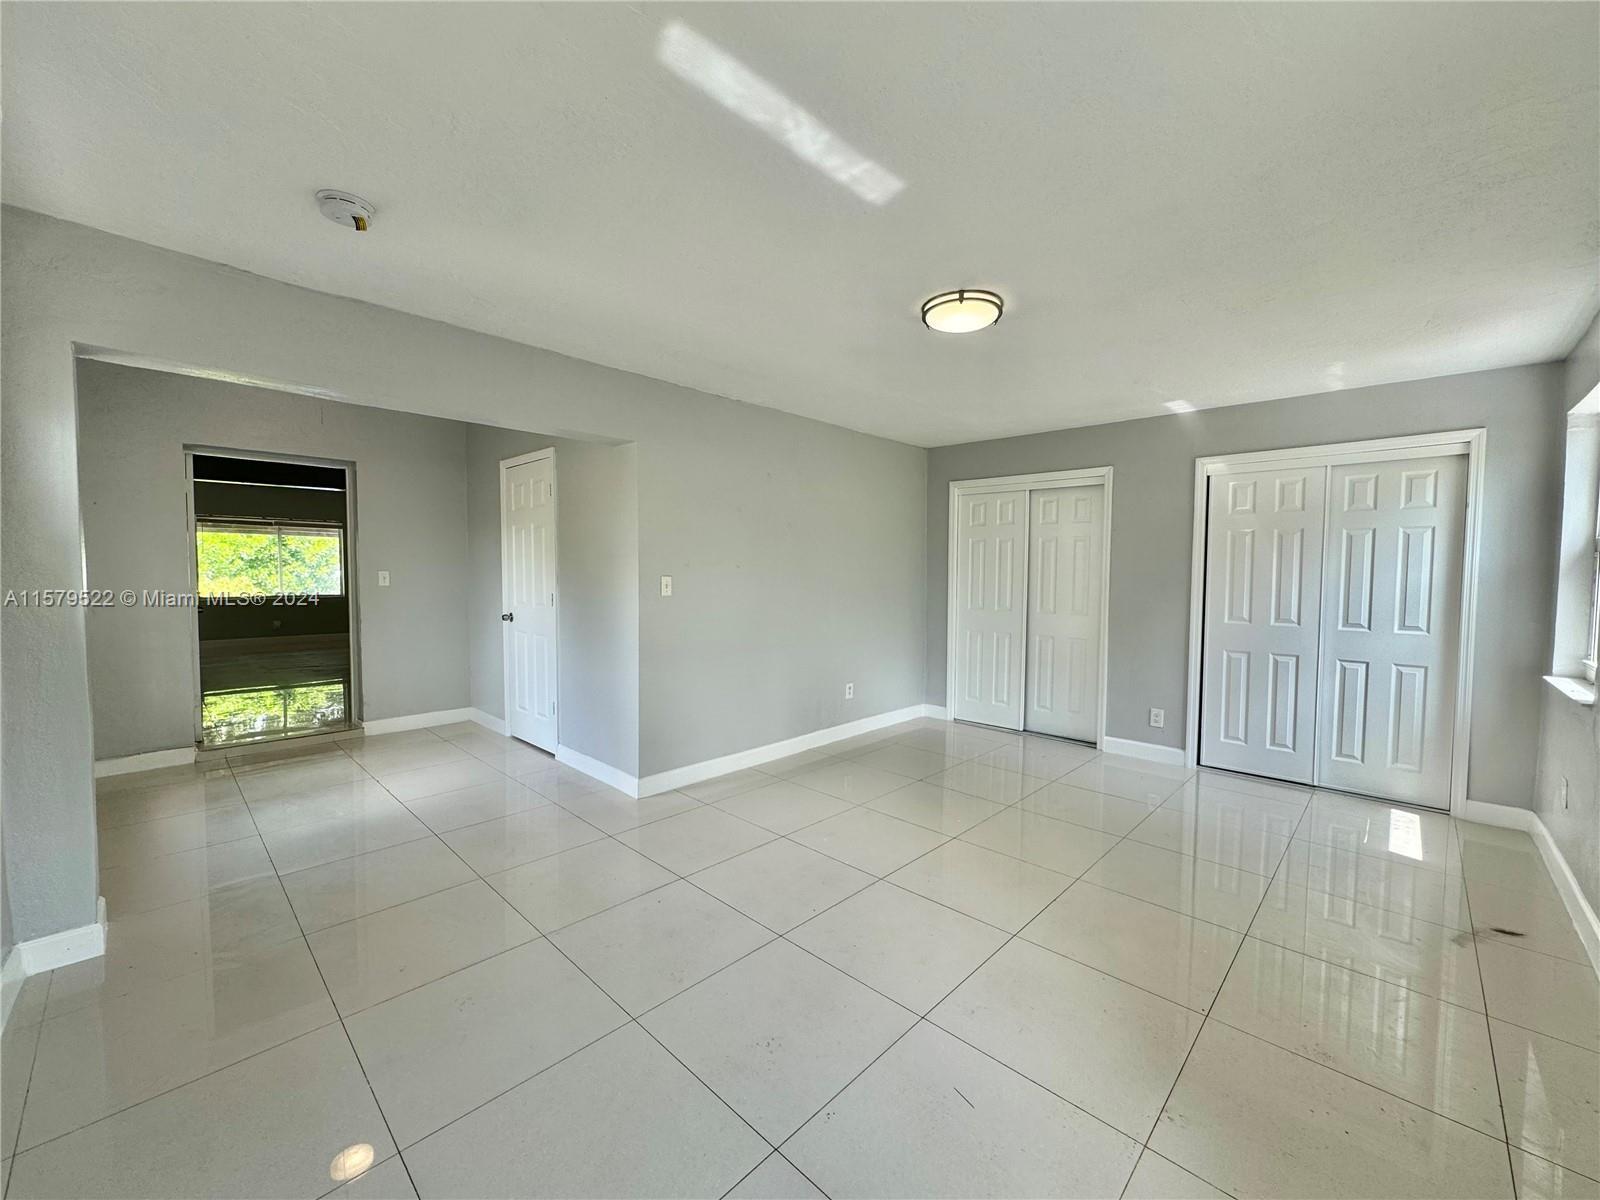 Photo of 4919 NW 11th Ave in Miami, FL